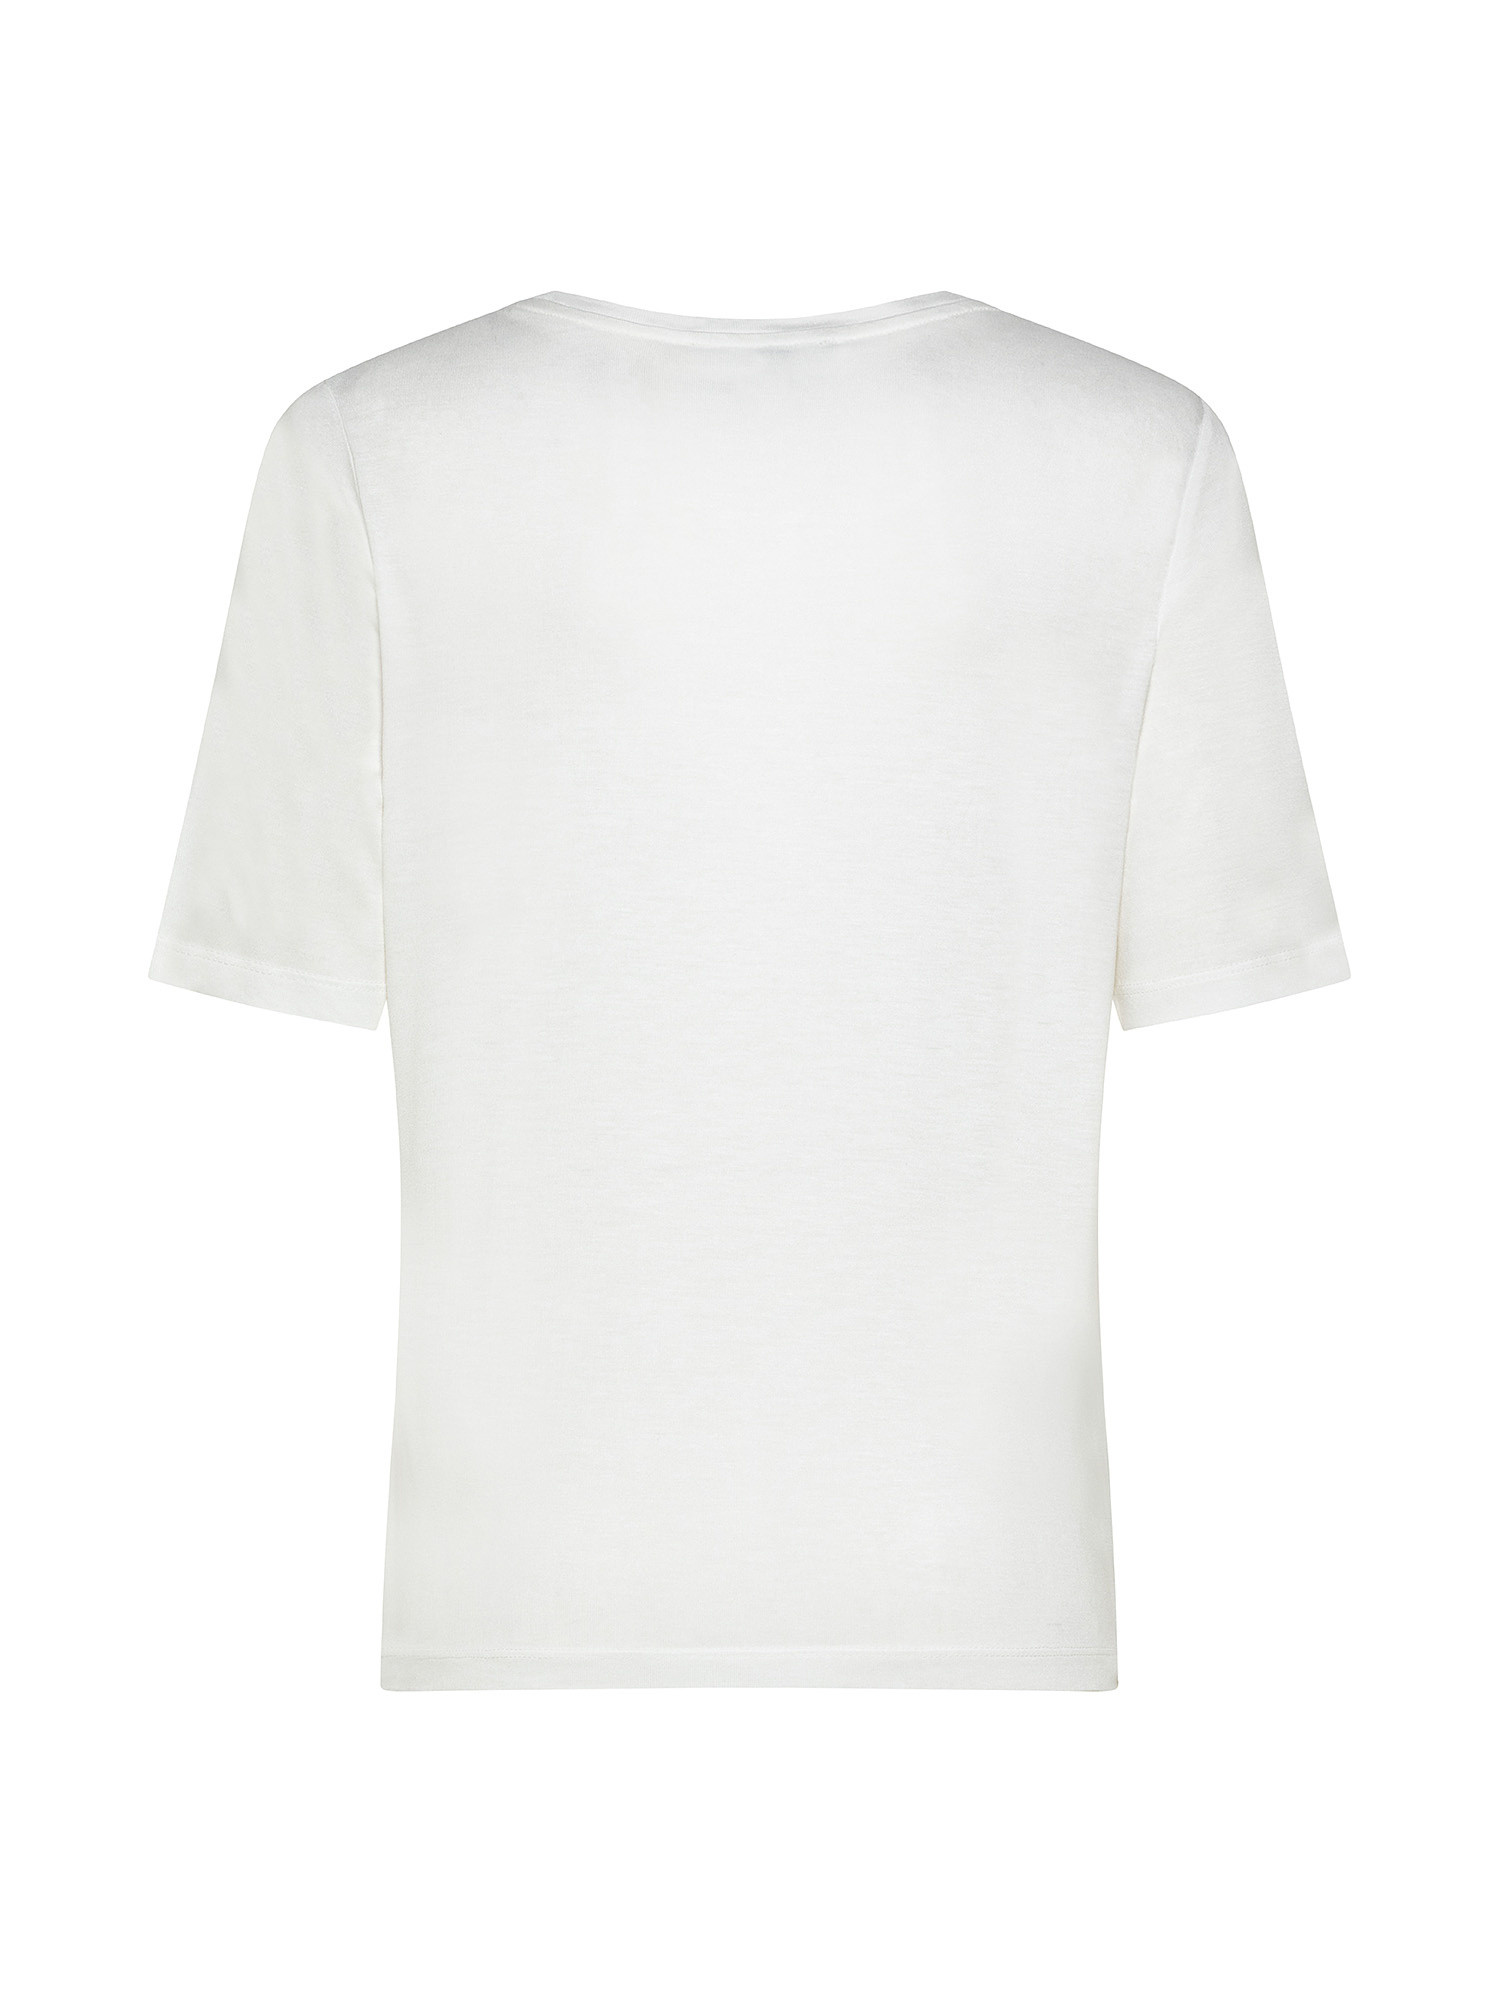 T-shirt with printed writing, White, large image number 1